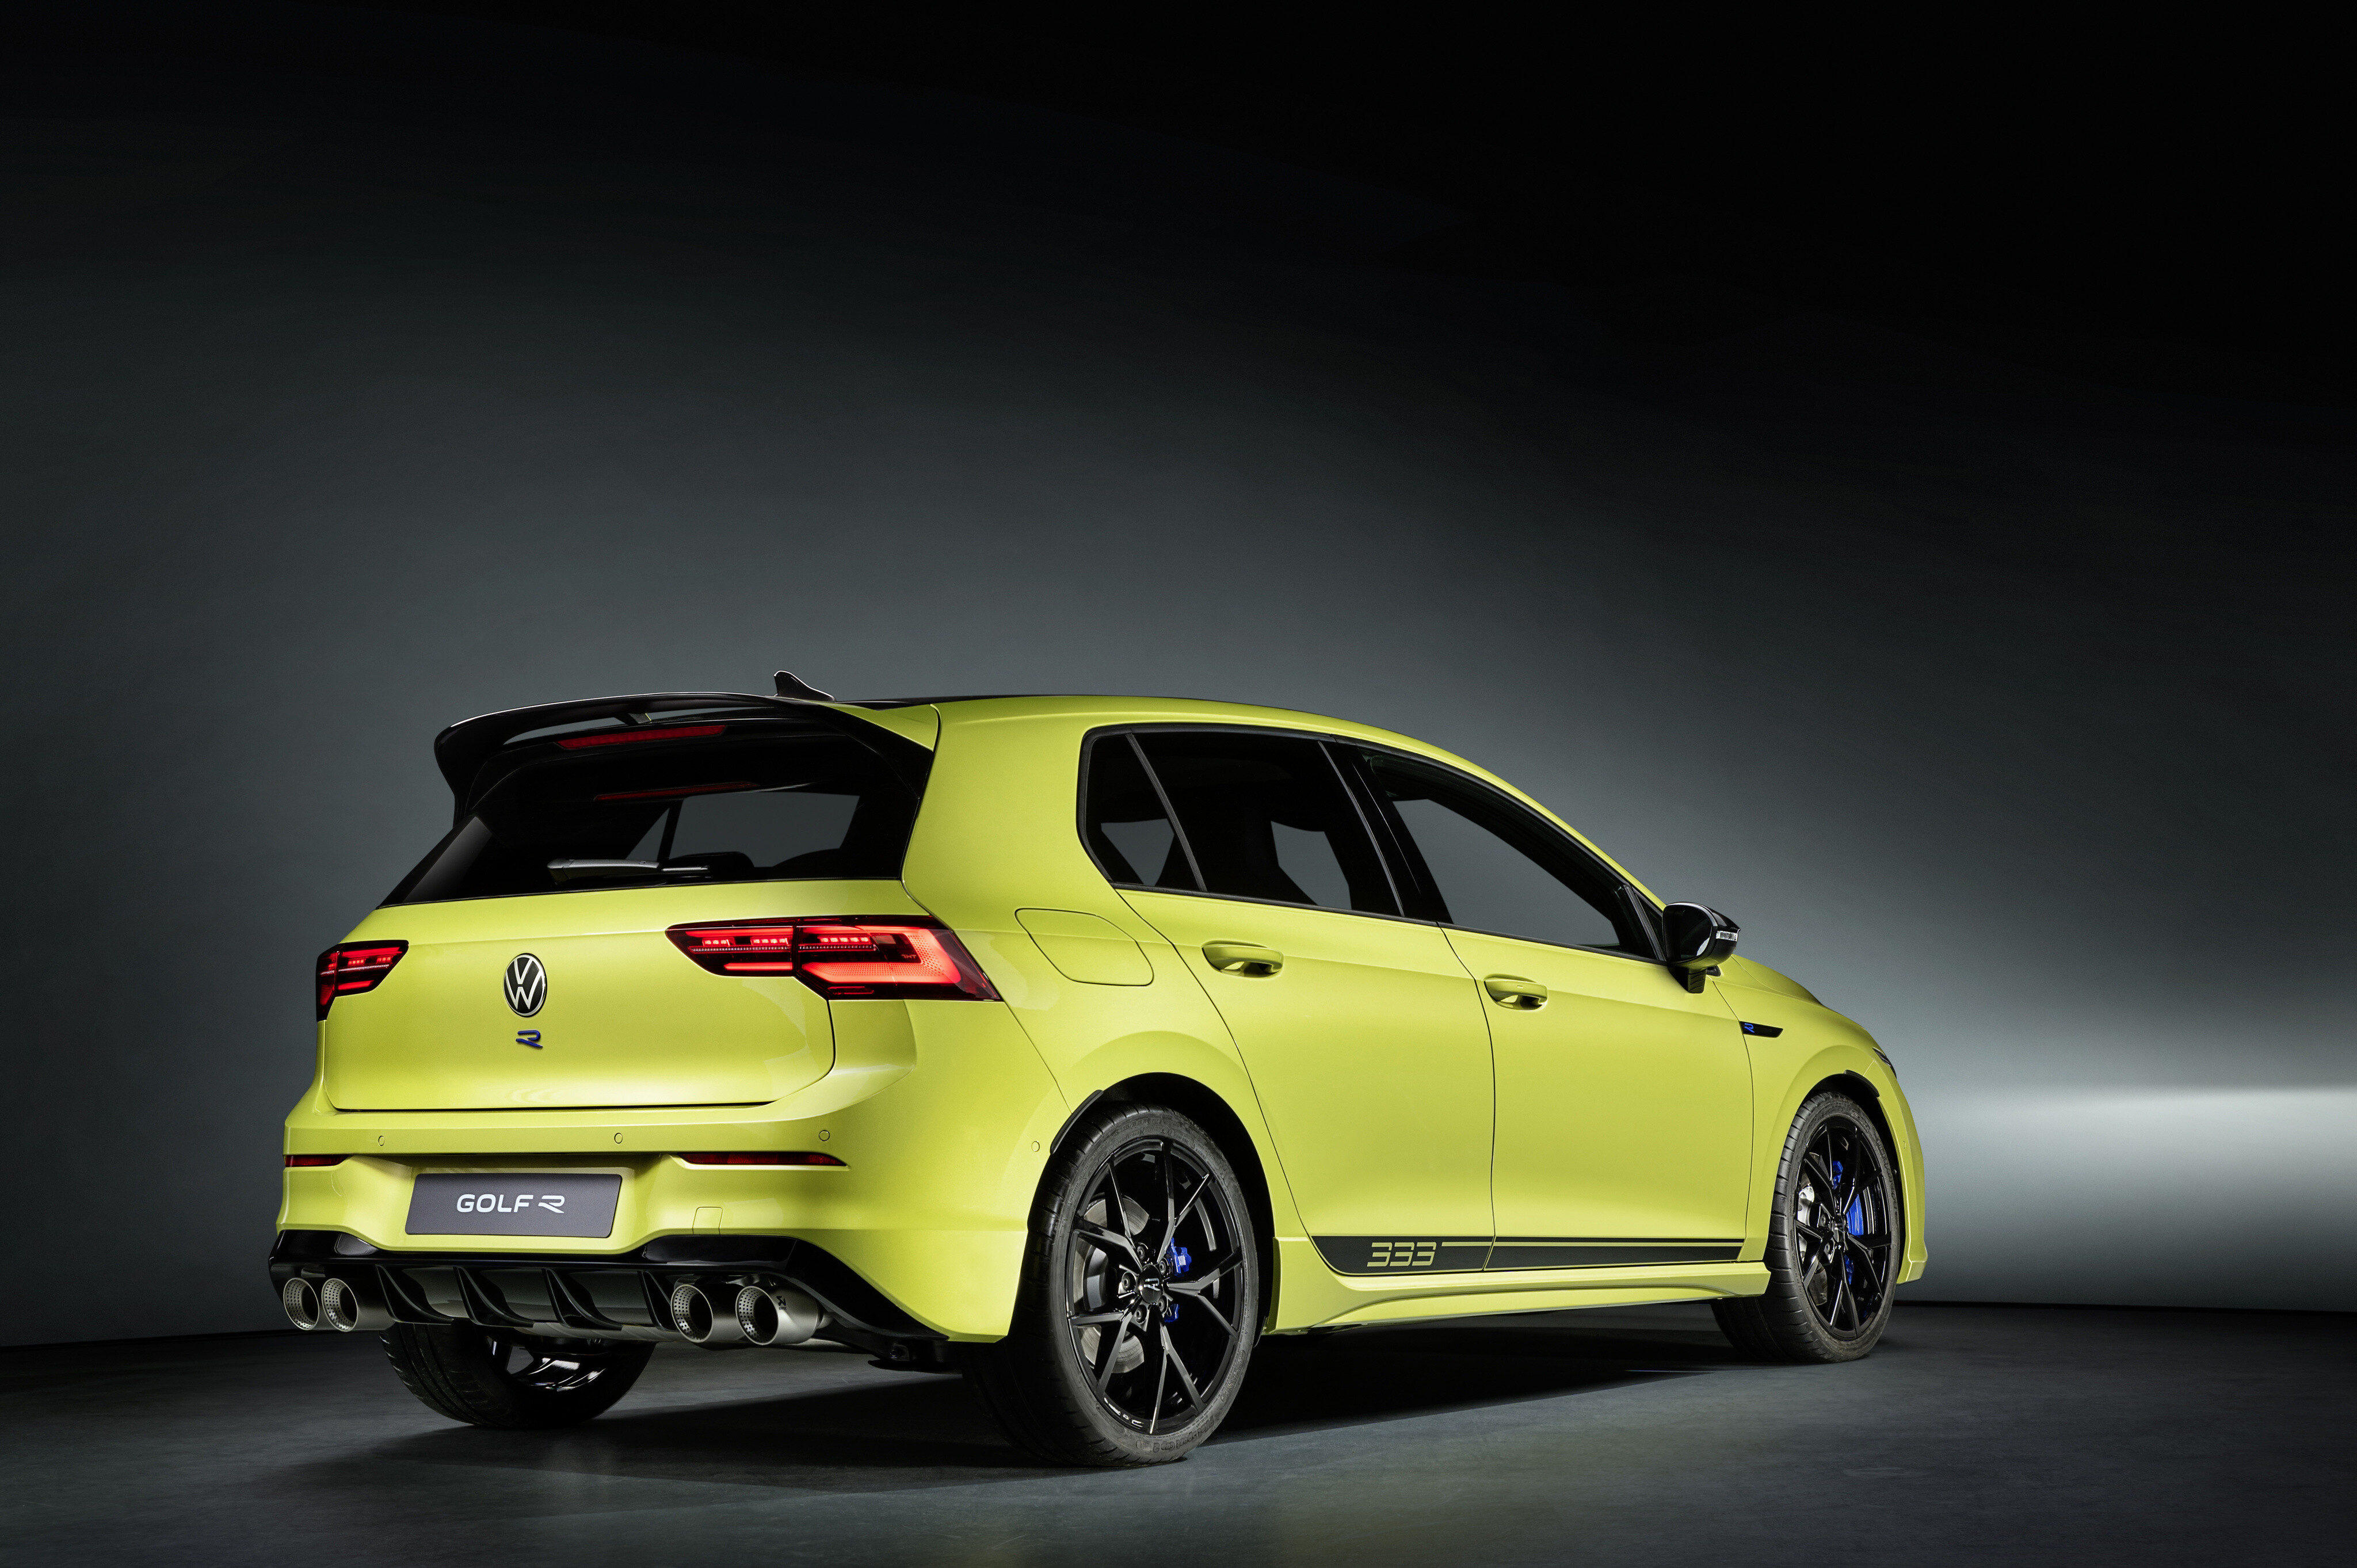 Volkswagen reveals limited edition Golf R 333, costlier than an Audi RS 3